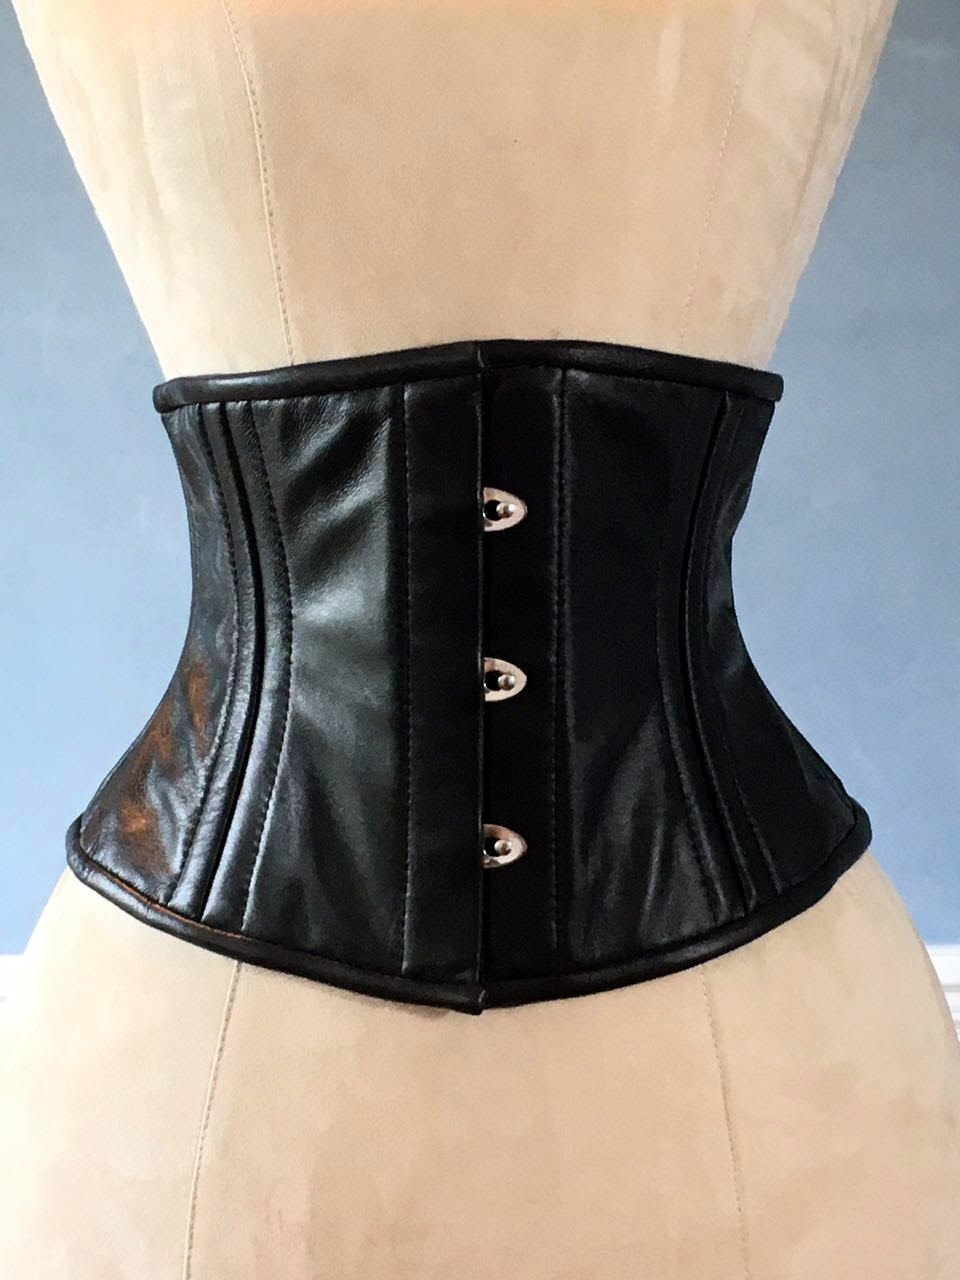  Kranchungel Corsets for Women Punk Rock Faux Leather Zipper  Corset Retro Goth Waist Cincher Basque Bustier X-Small Silver: Clothing,  Shoes & Jewelry